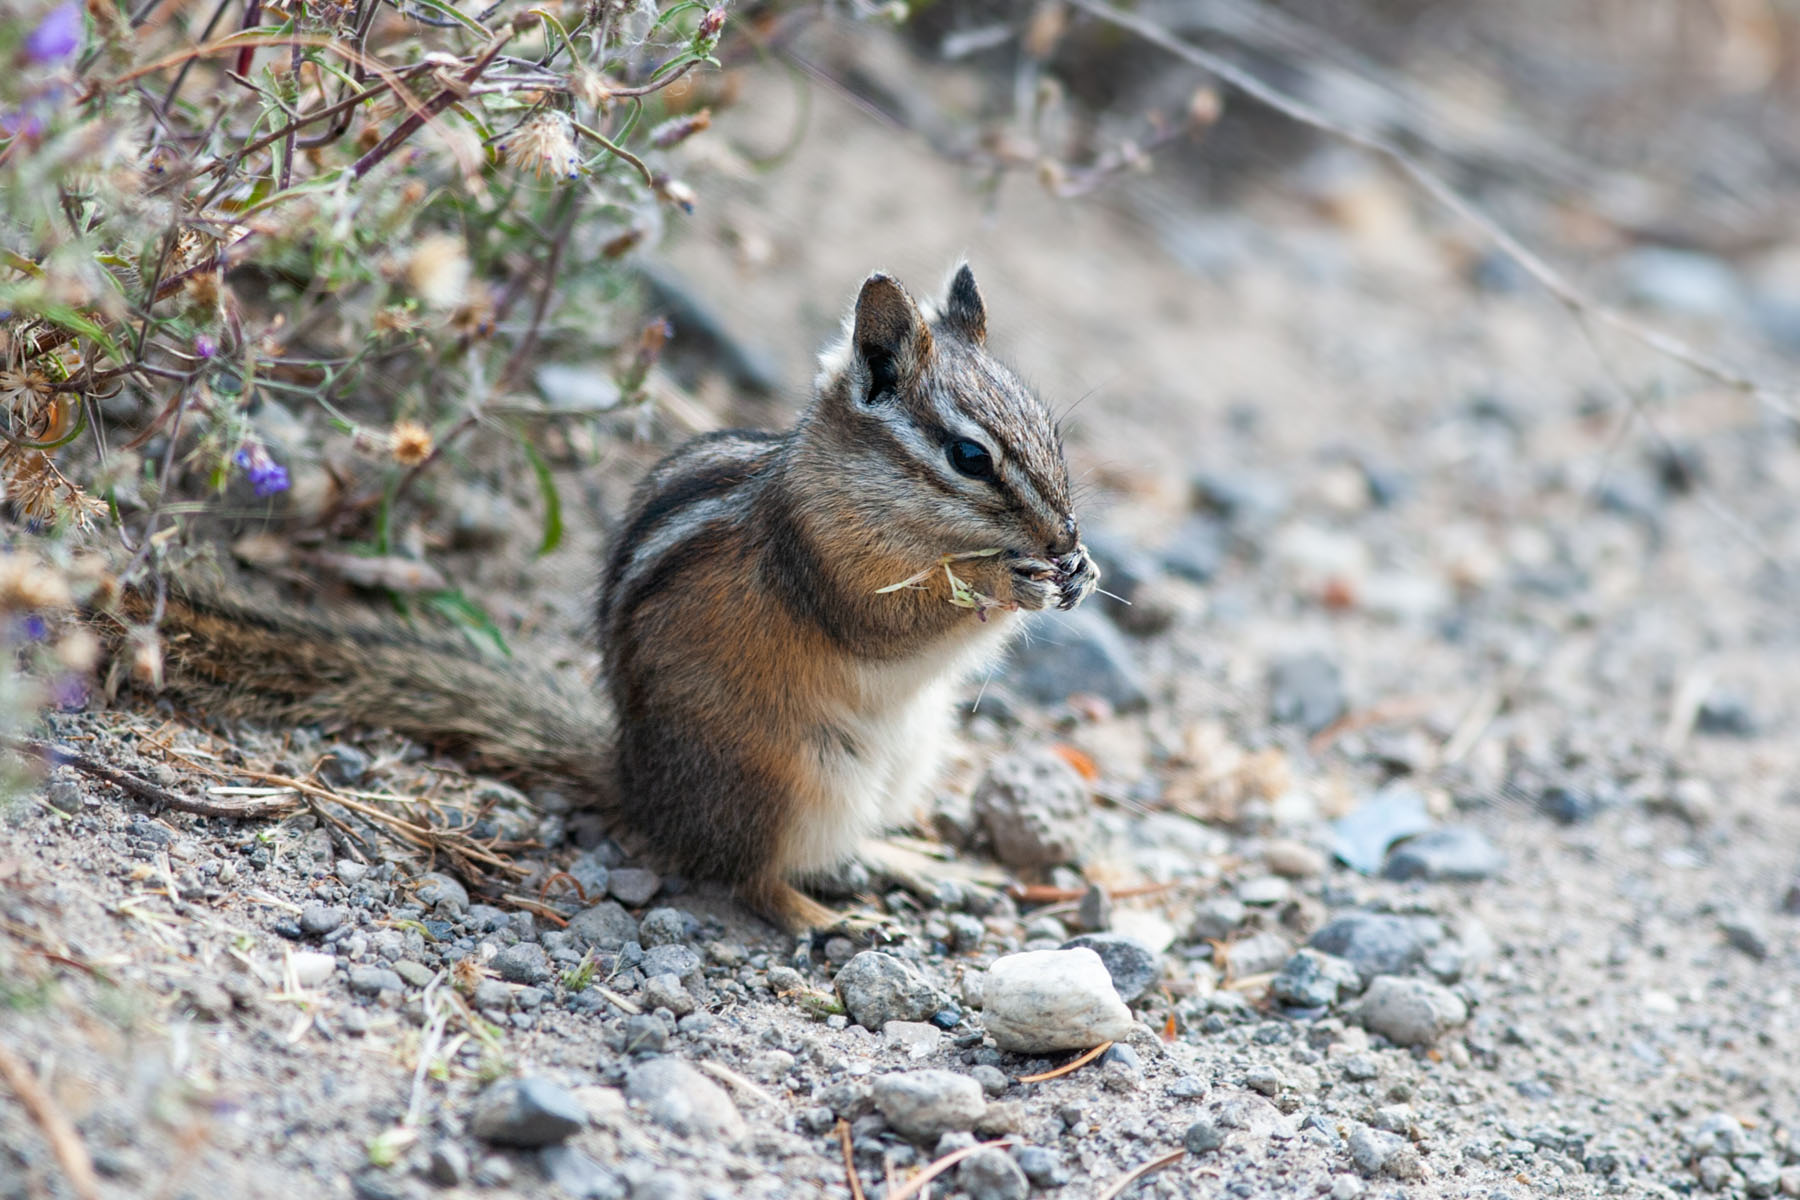 A ground squirrel gets a snack.  Click for next photo.